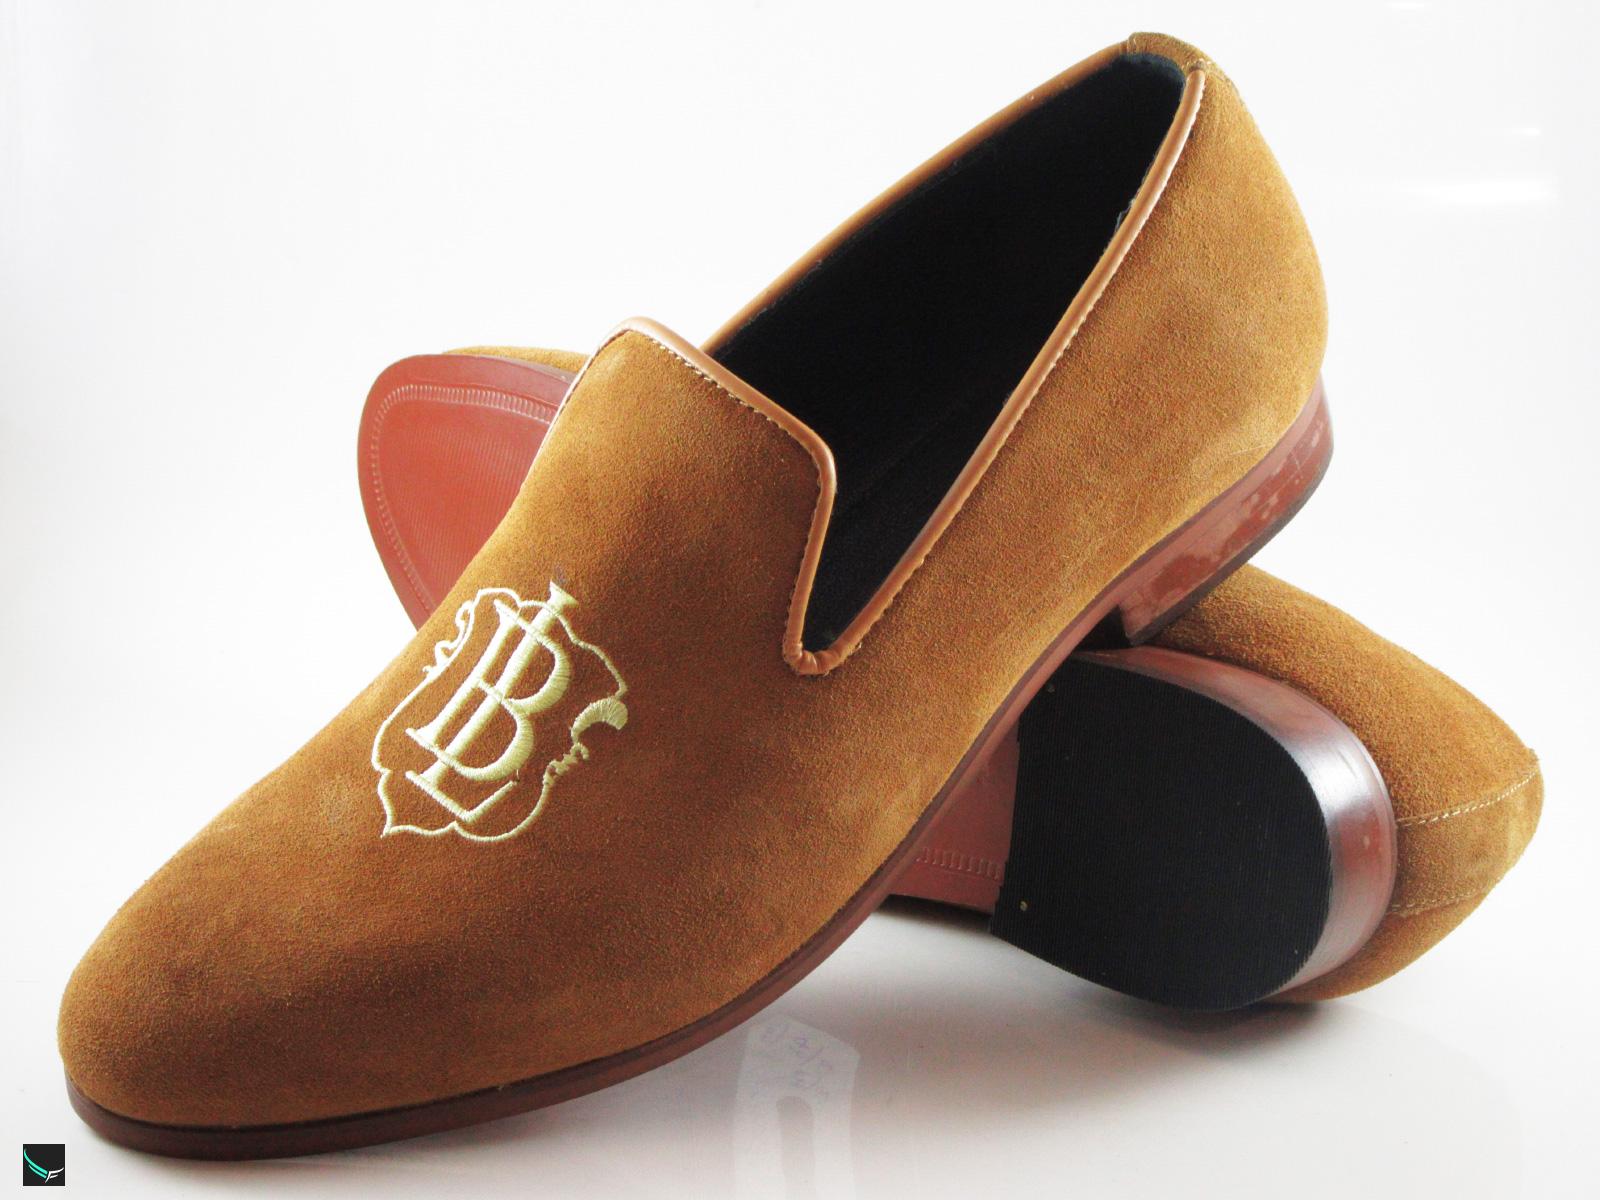 tan loafer shoes